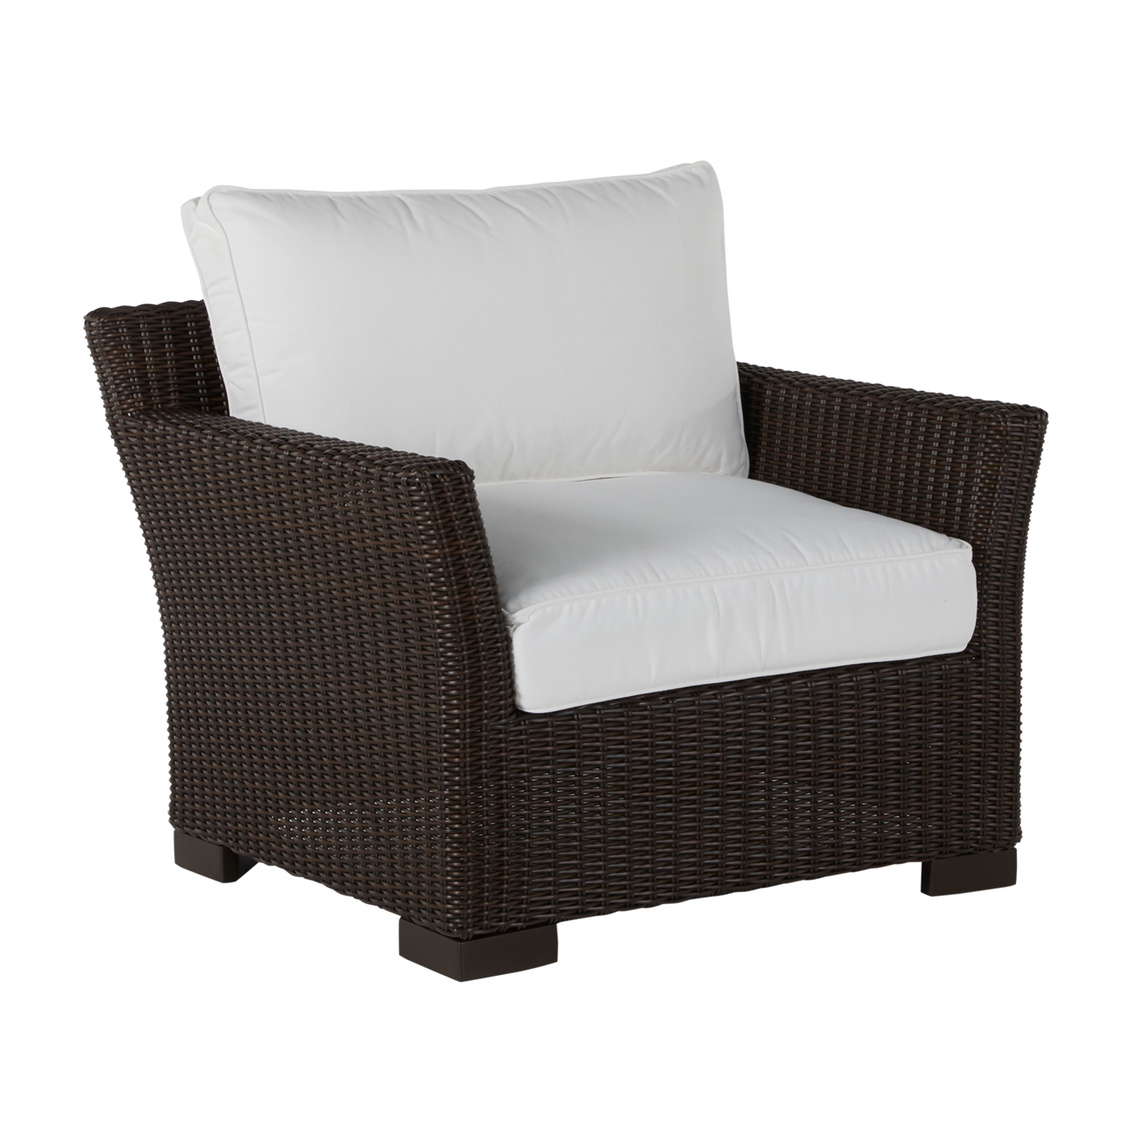 club woven lounge chair in black walnut – frame only product image